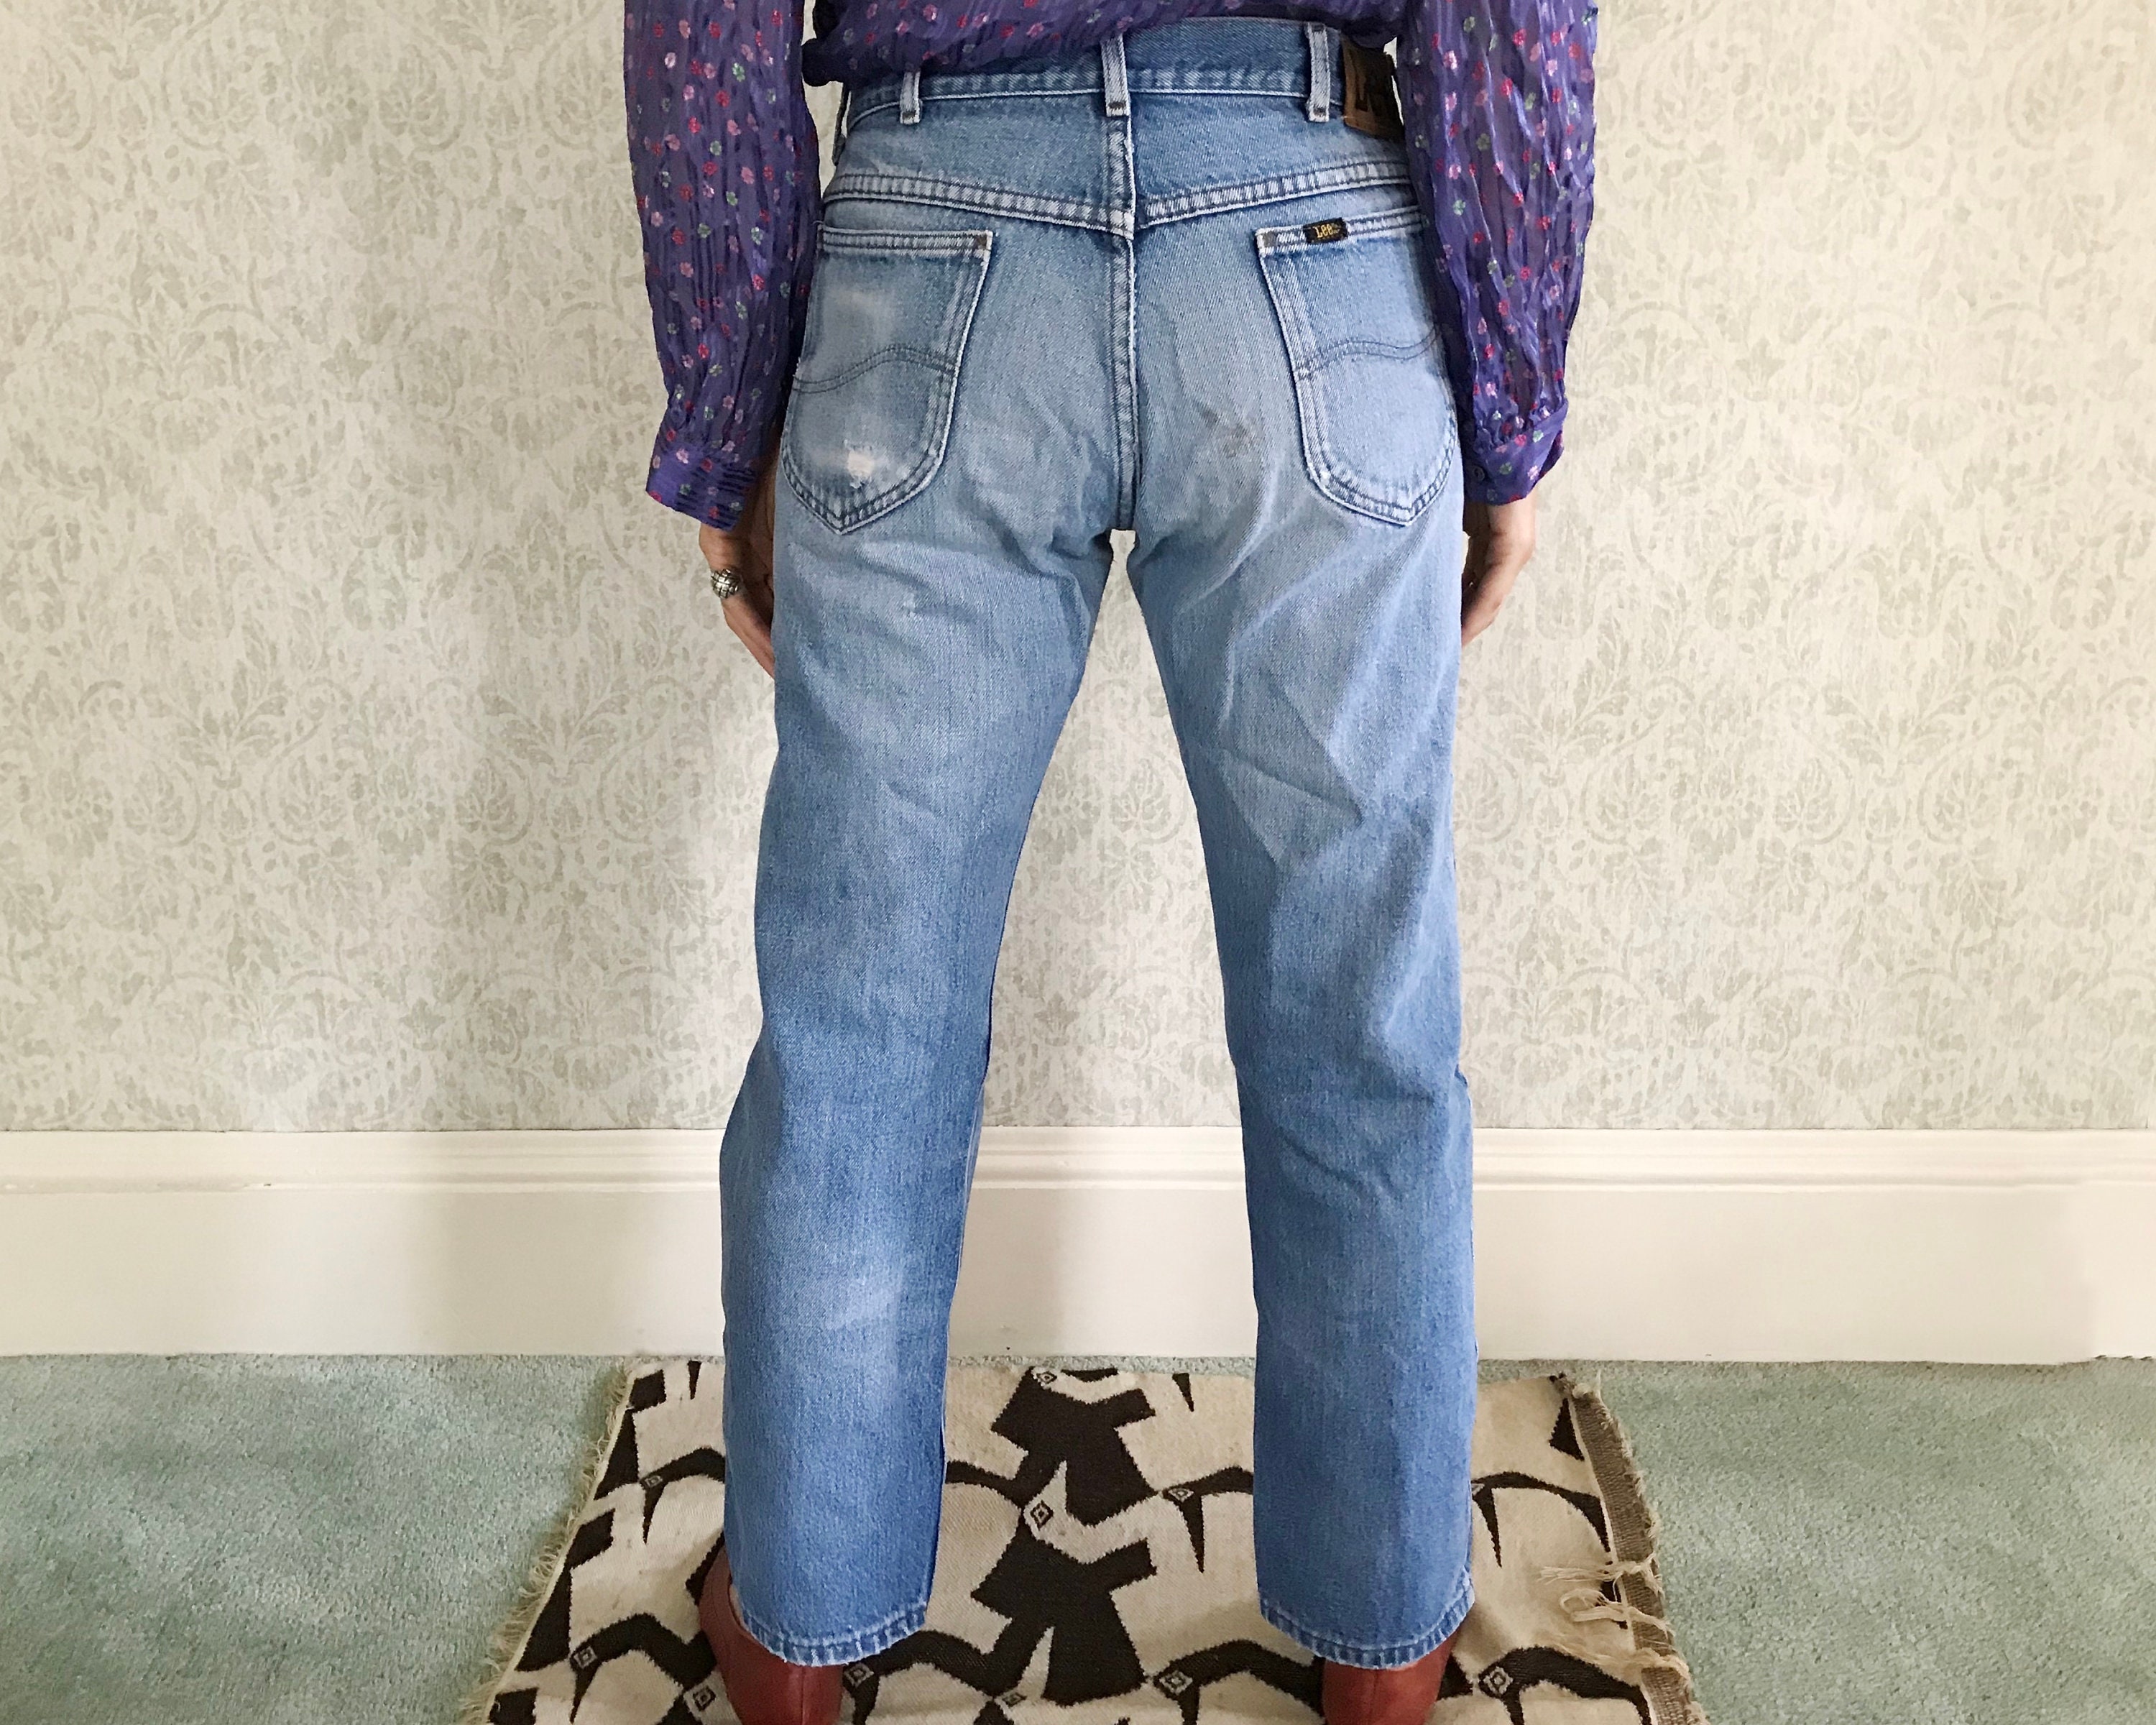 LEE RIDERS High Waisted Boyfriend Jeans Ripped Vintage 80s - Etsy